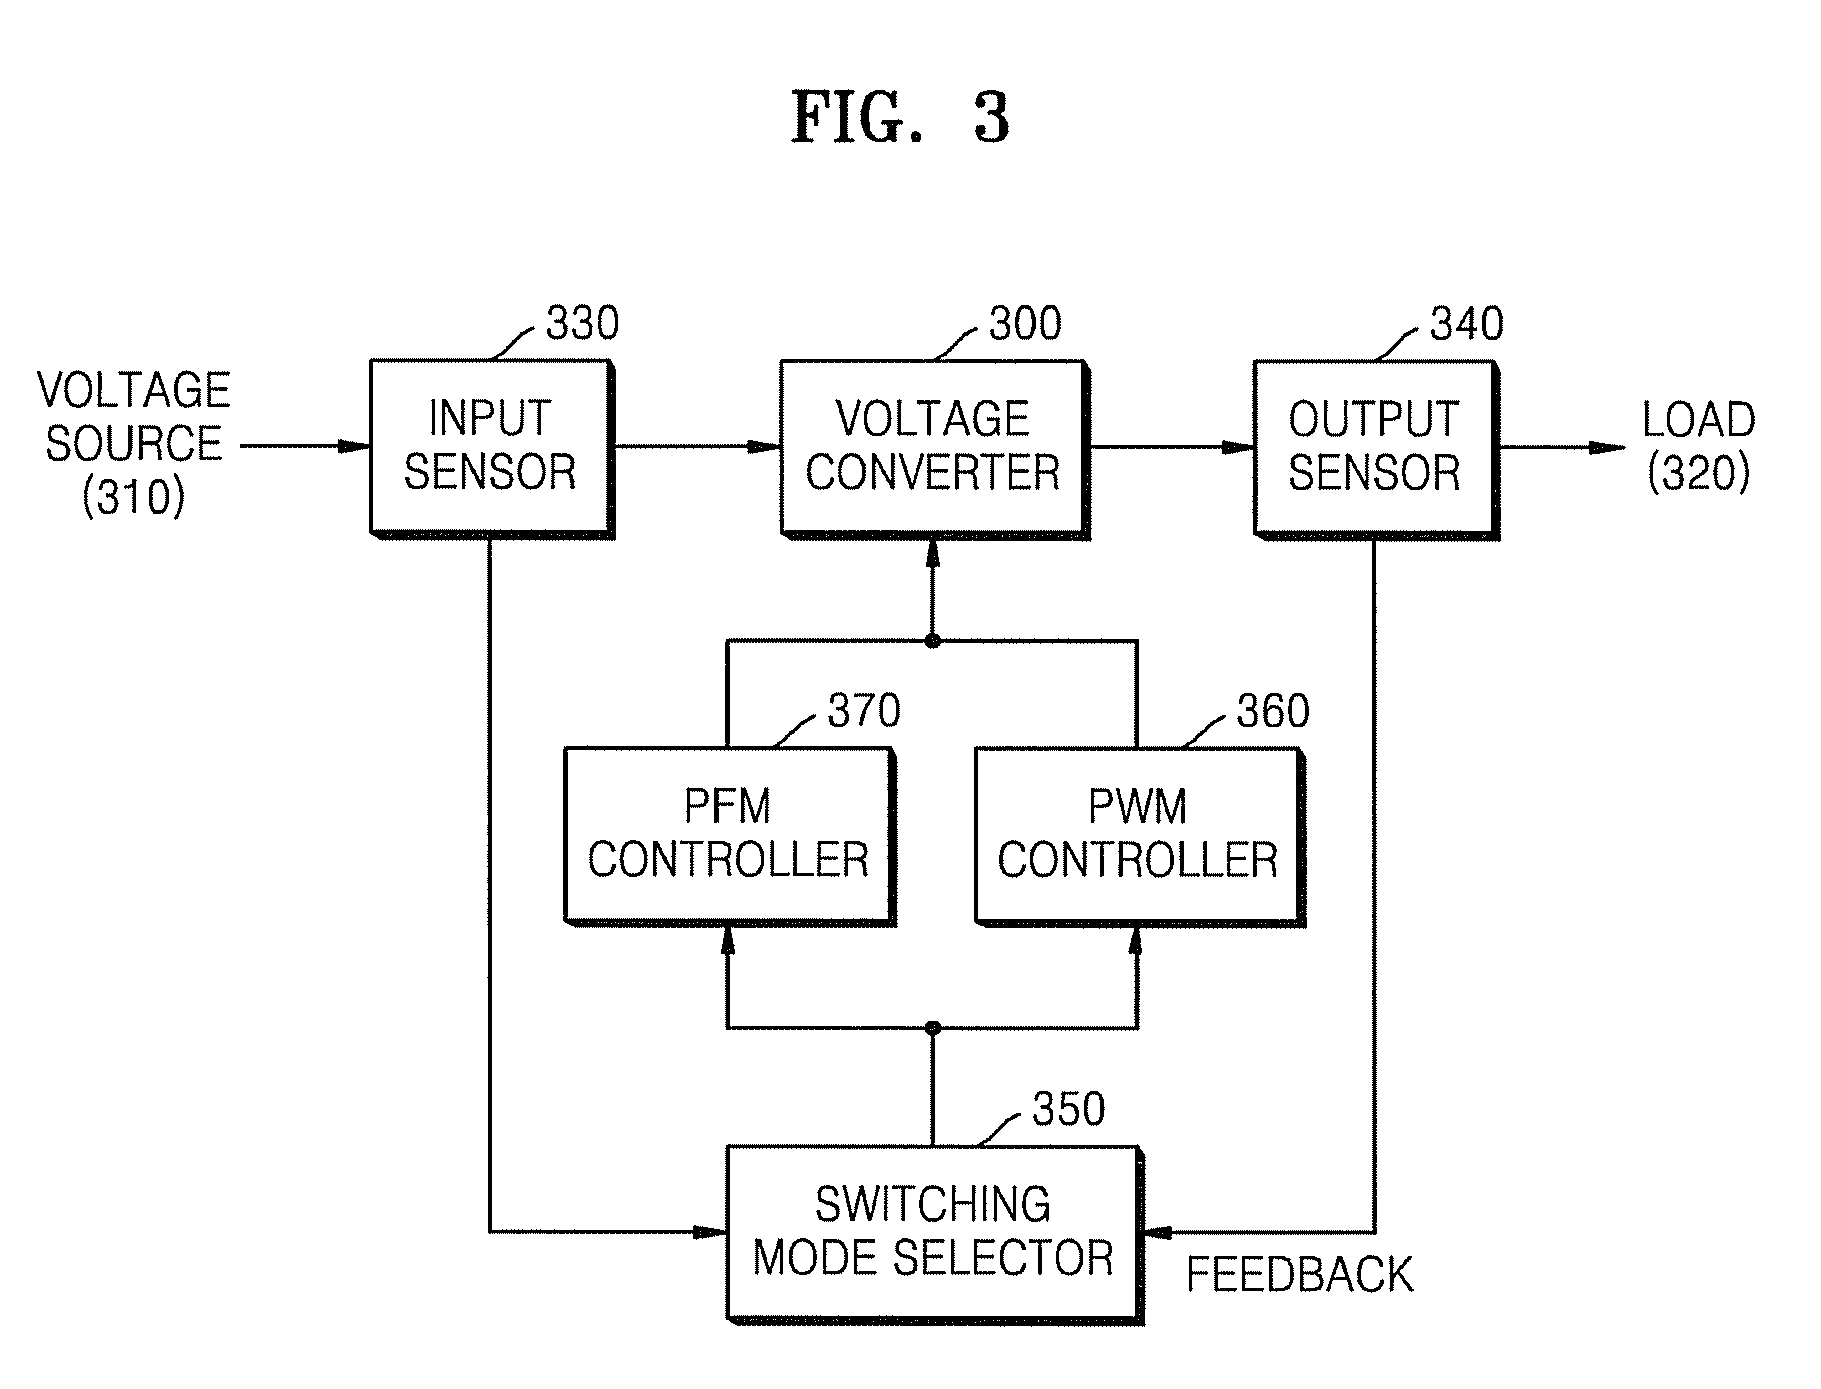 Method and apparatus to control voltage conversion mode